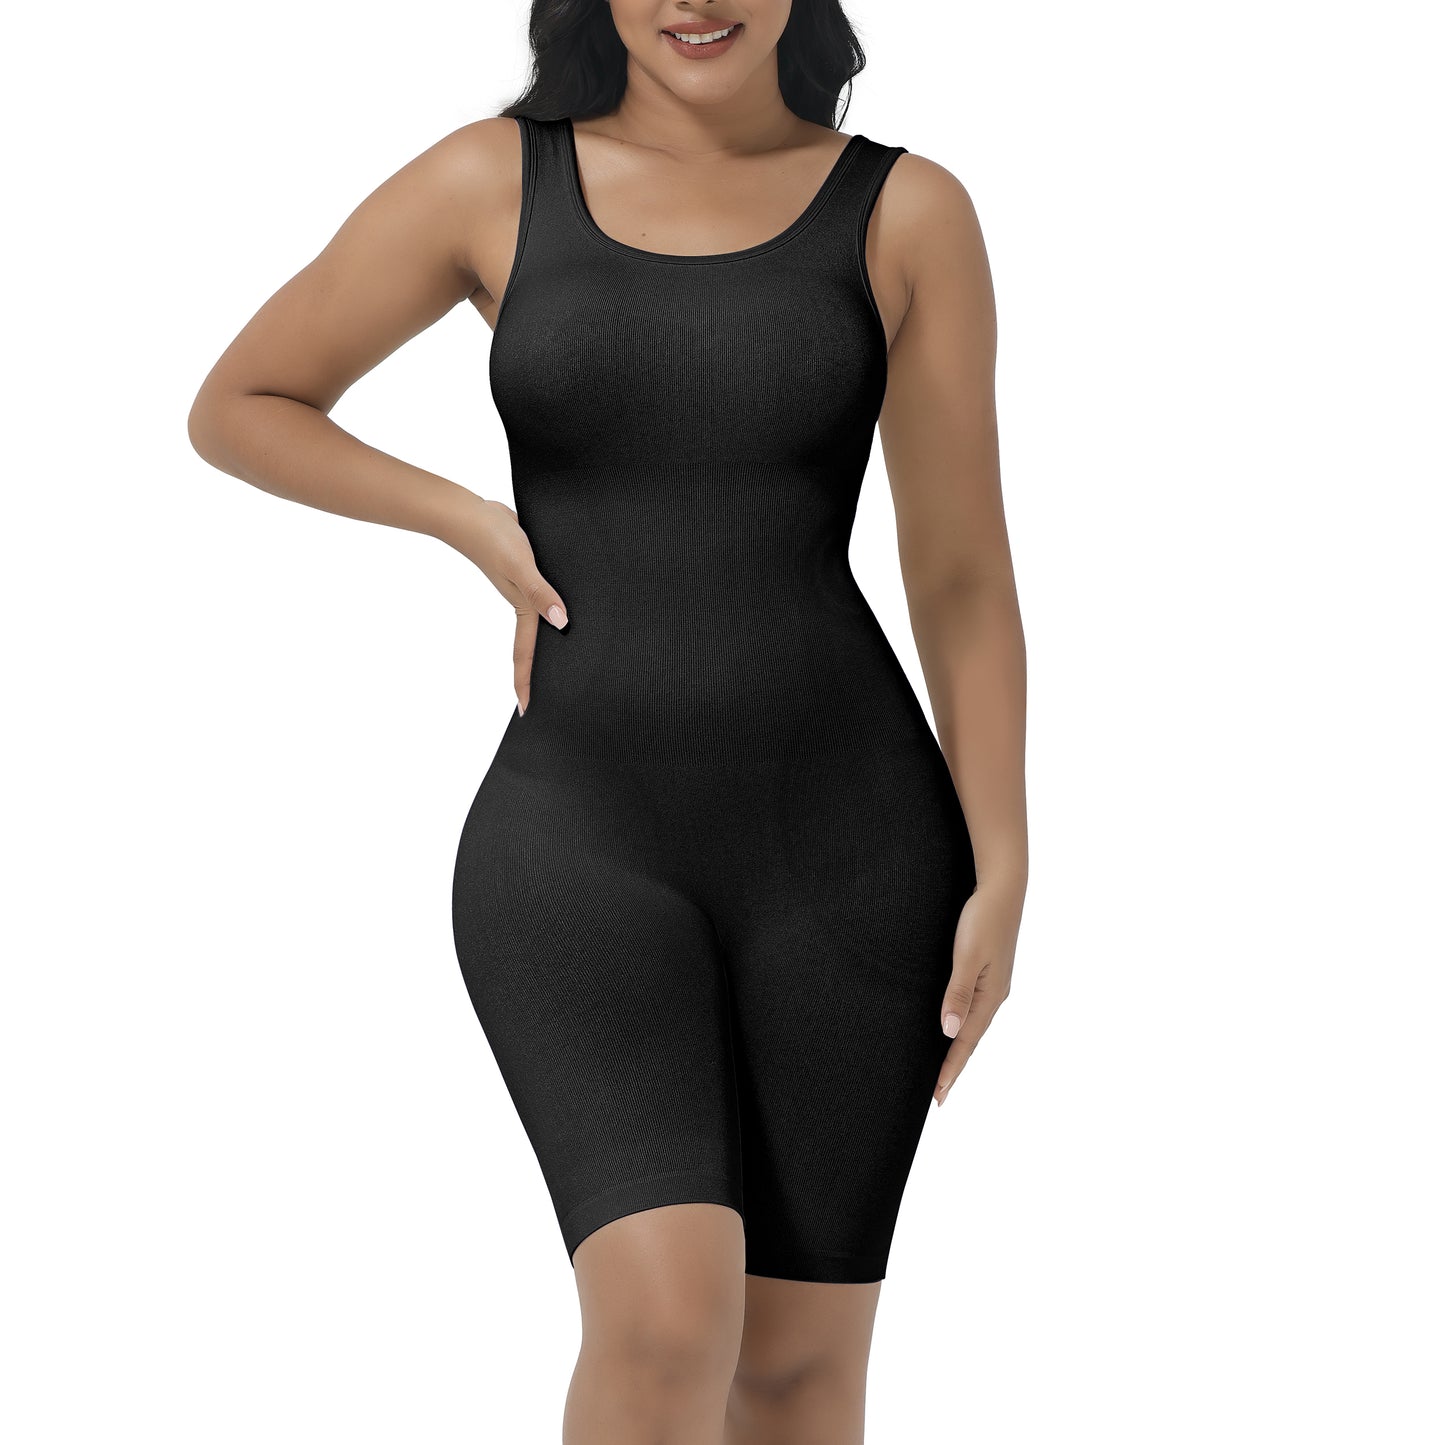 Ribbed Solid Color Tummy Control Sleeveless Seamless Jumpsuit